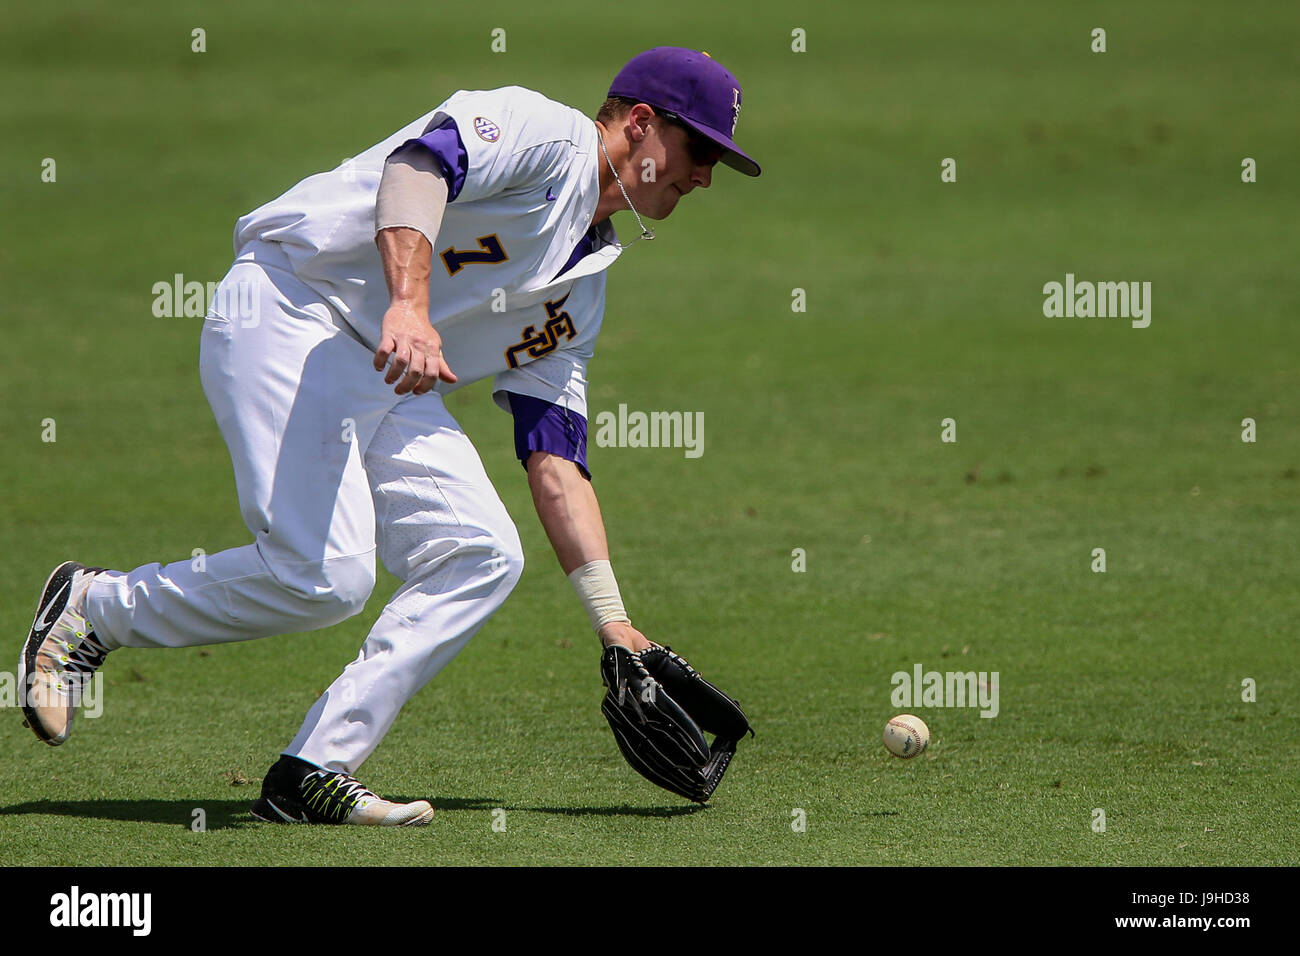 Baton Rouge, LA, USA. 02nd 2017. LSU outfielder Greg Deichmann (7) grabs a ground ball during the Baton Rouge Division I Regional game between Texas Southern and LSU at Alex Box